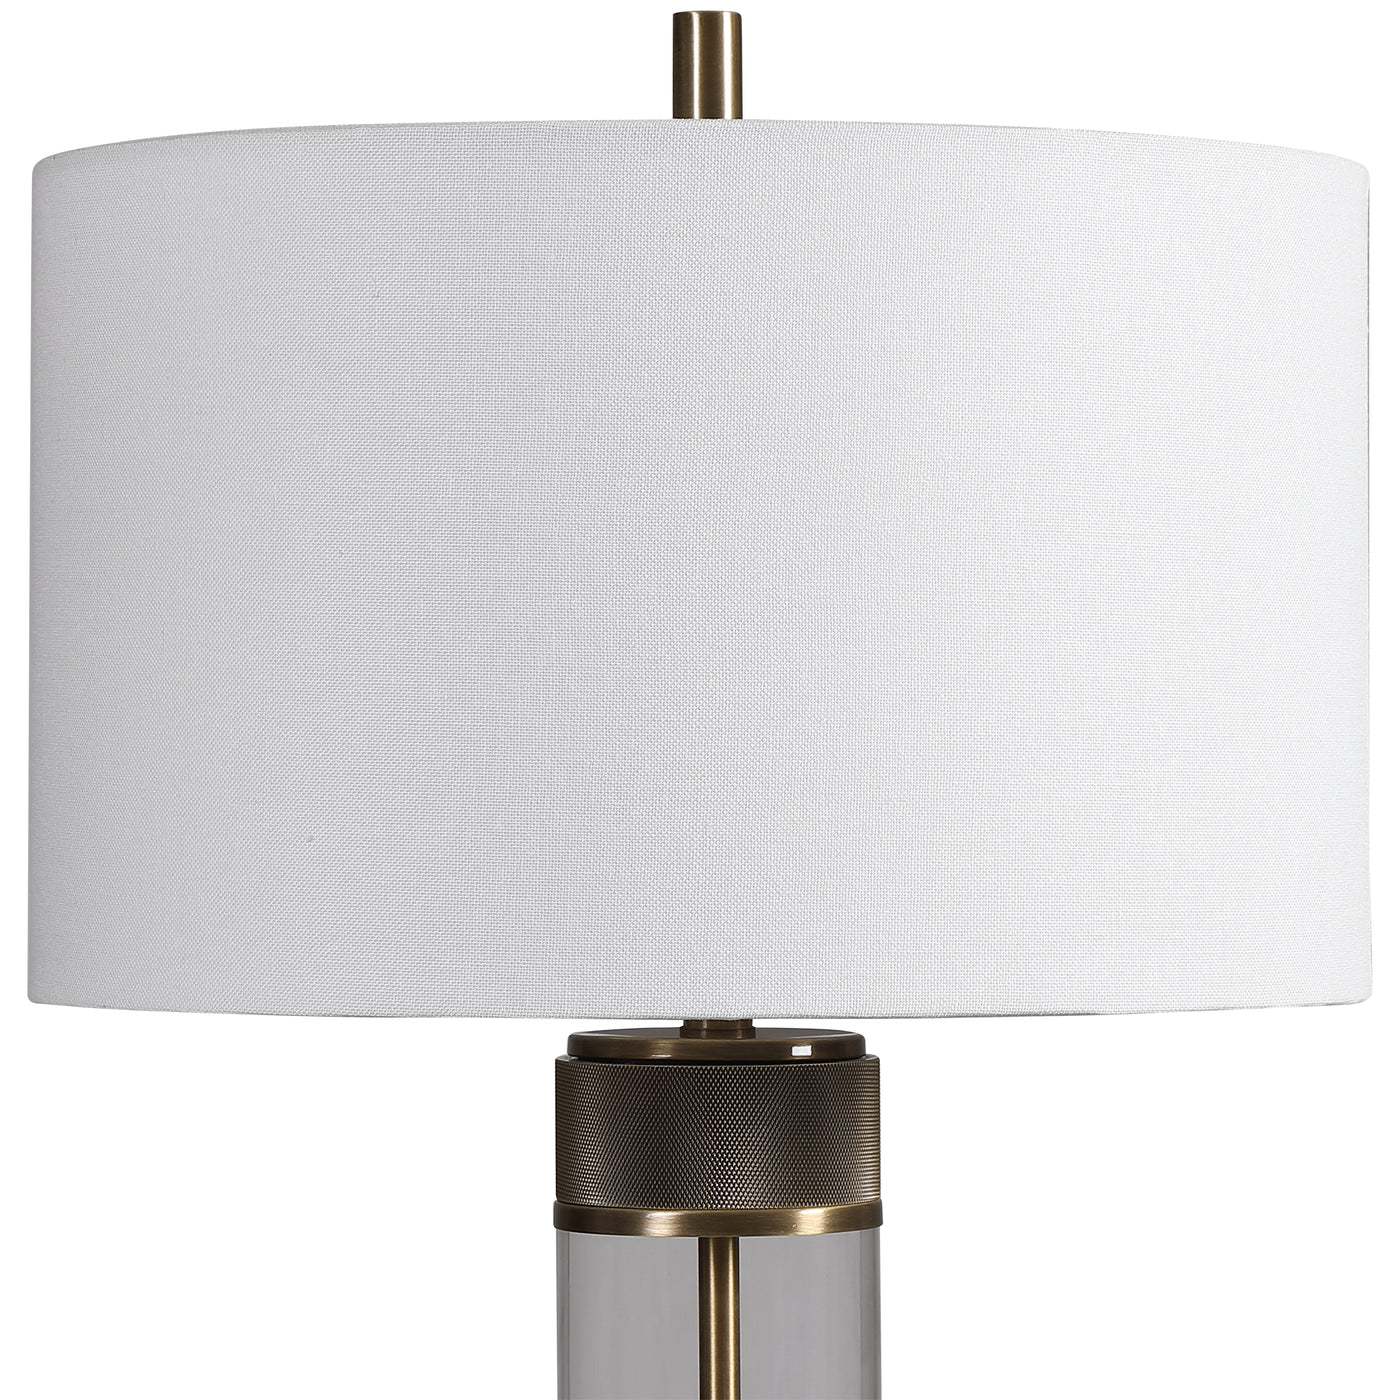 Showcasing A Clean Transitional Look, This Table Lamp Features A Clear Glass Base Accented With Antiqued Brass Plated, Hea...